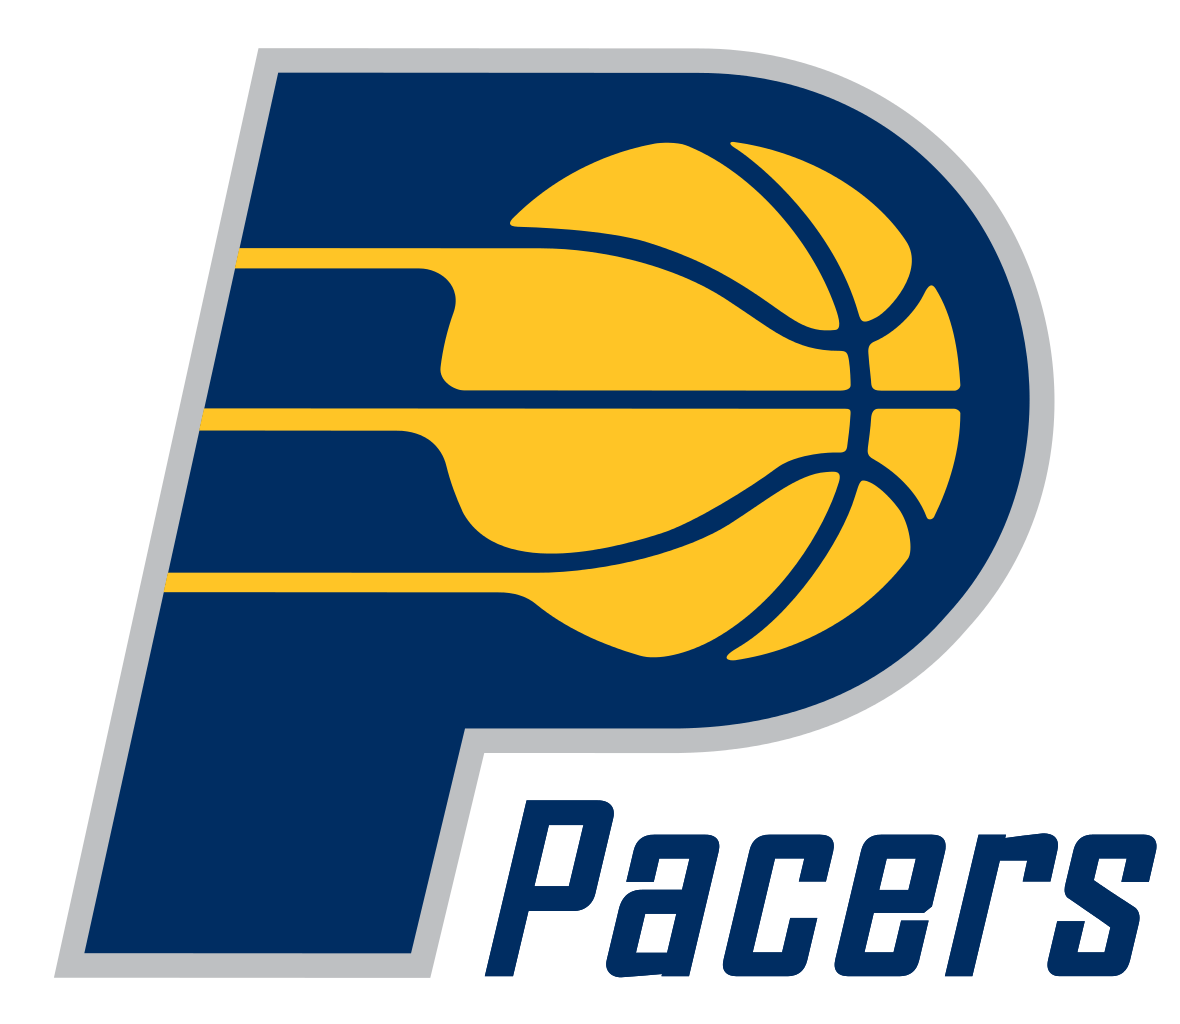 Pacers Logo - Indiana Pacers Logo transparent PNG - StickPNG